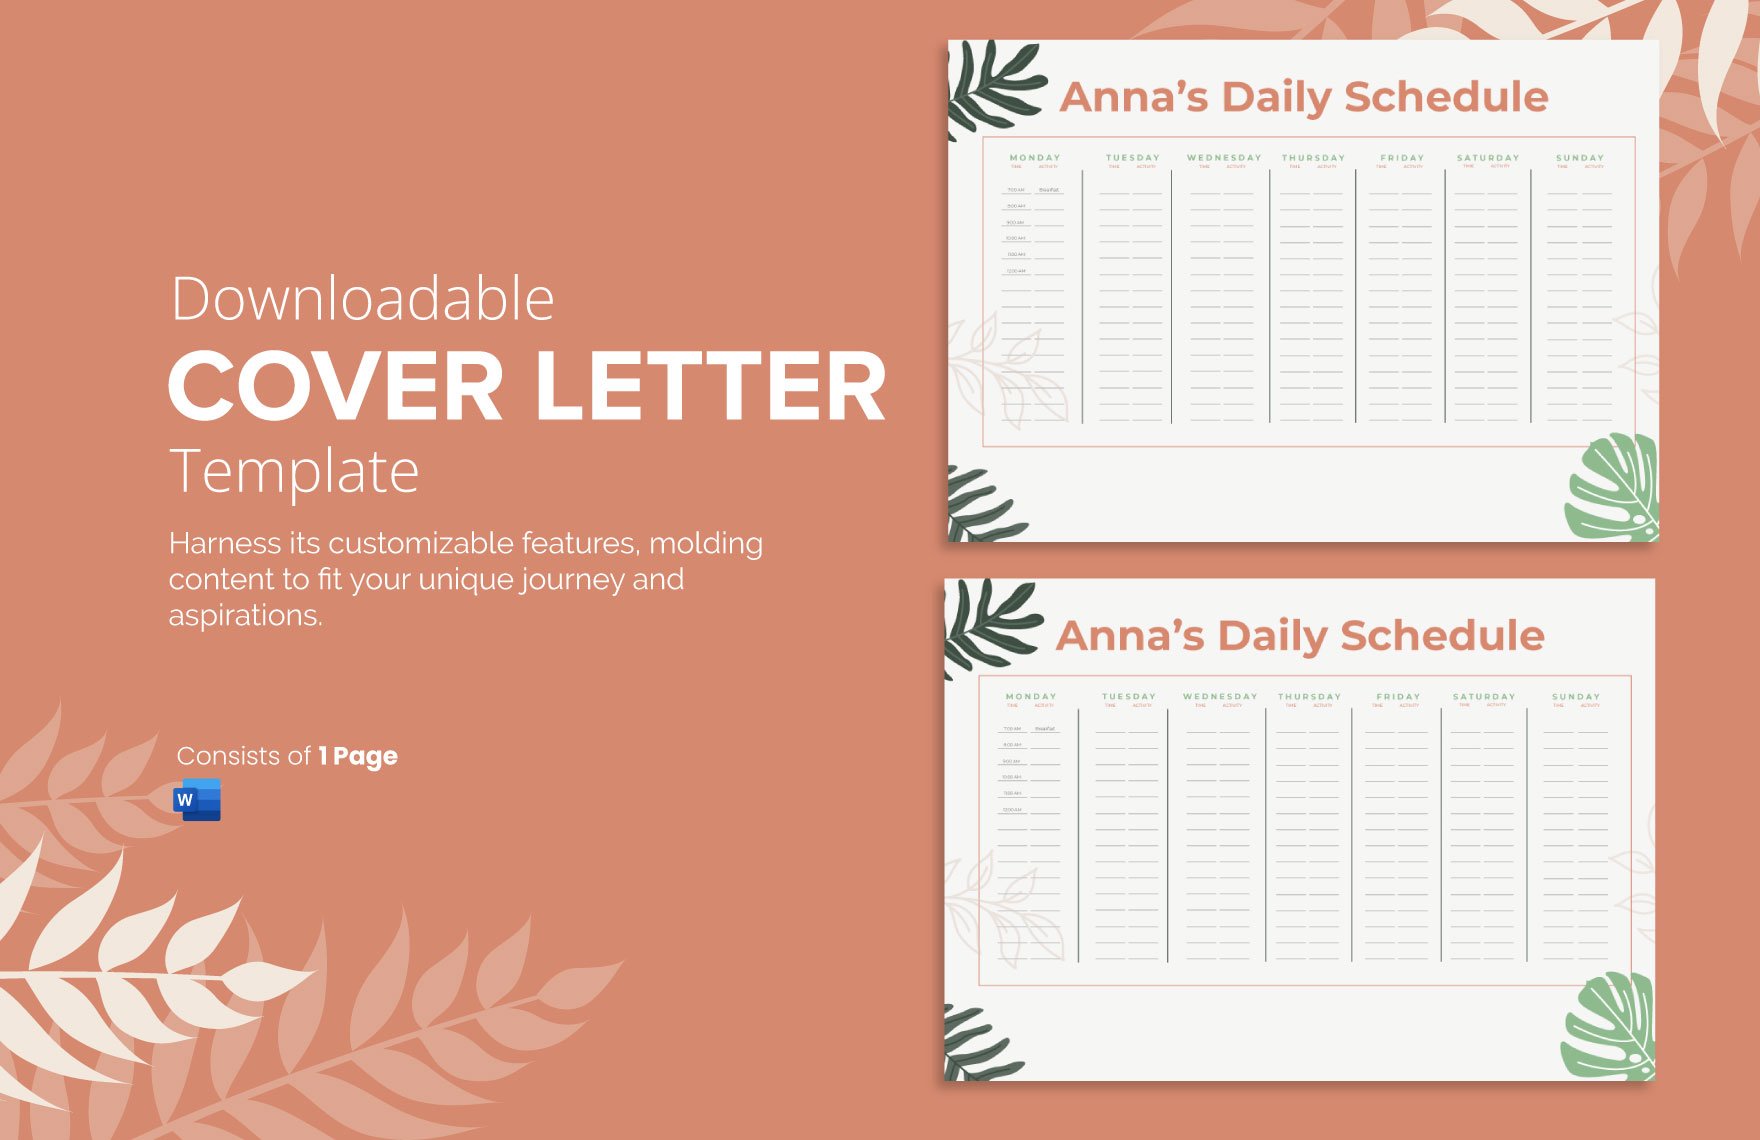 Free Downloadable Daily Schedule Template in Word